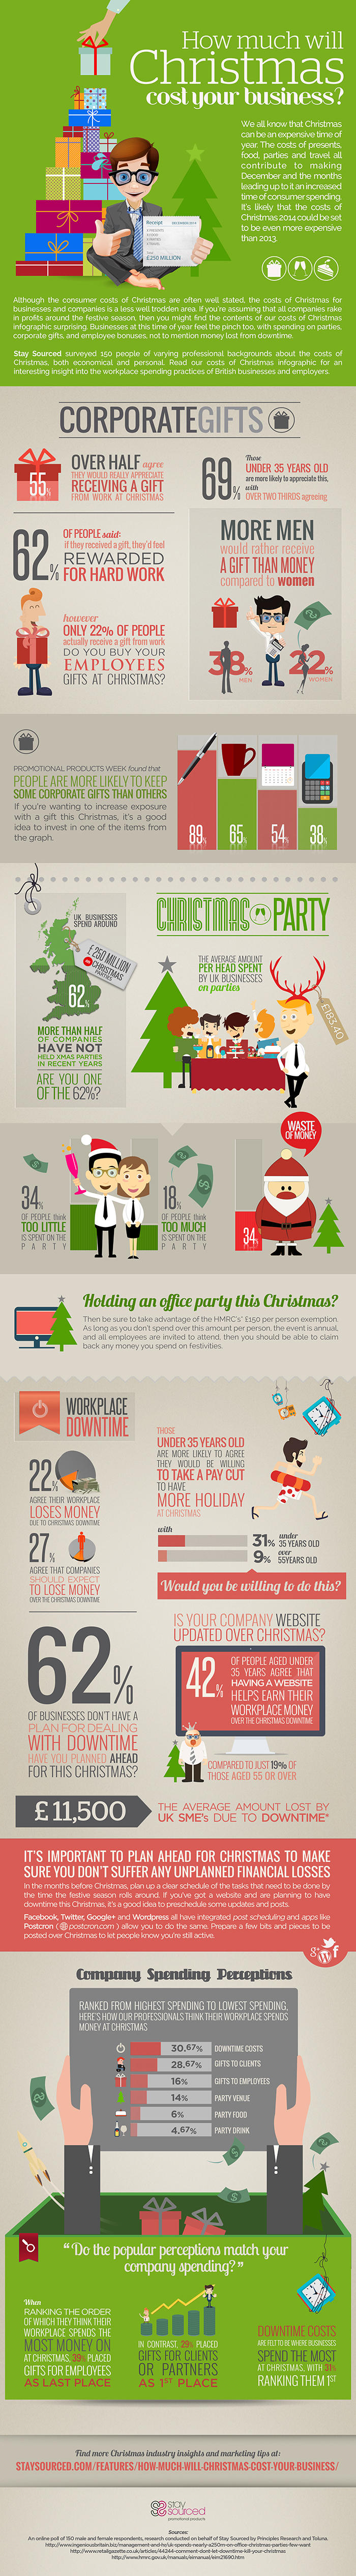 How much will Christmas cost your business?